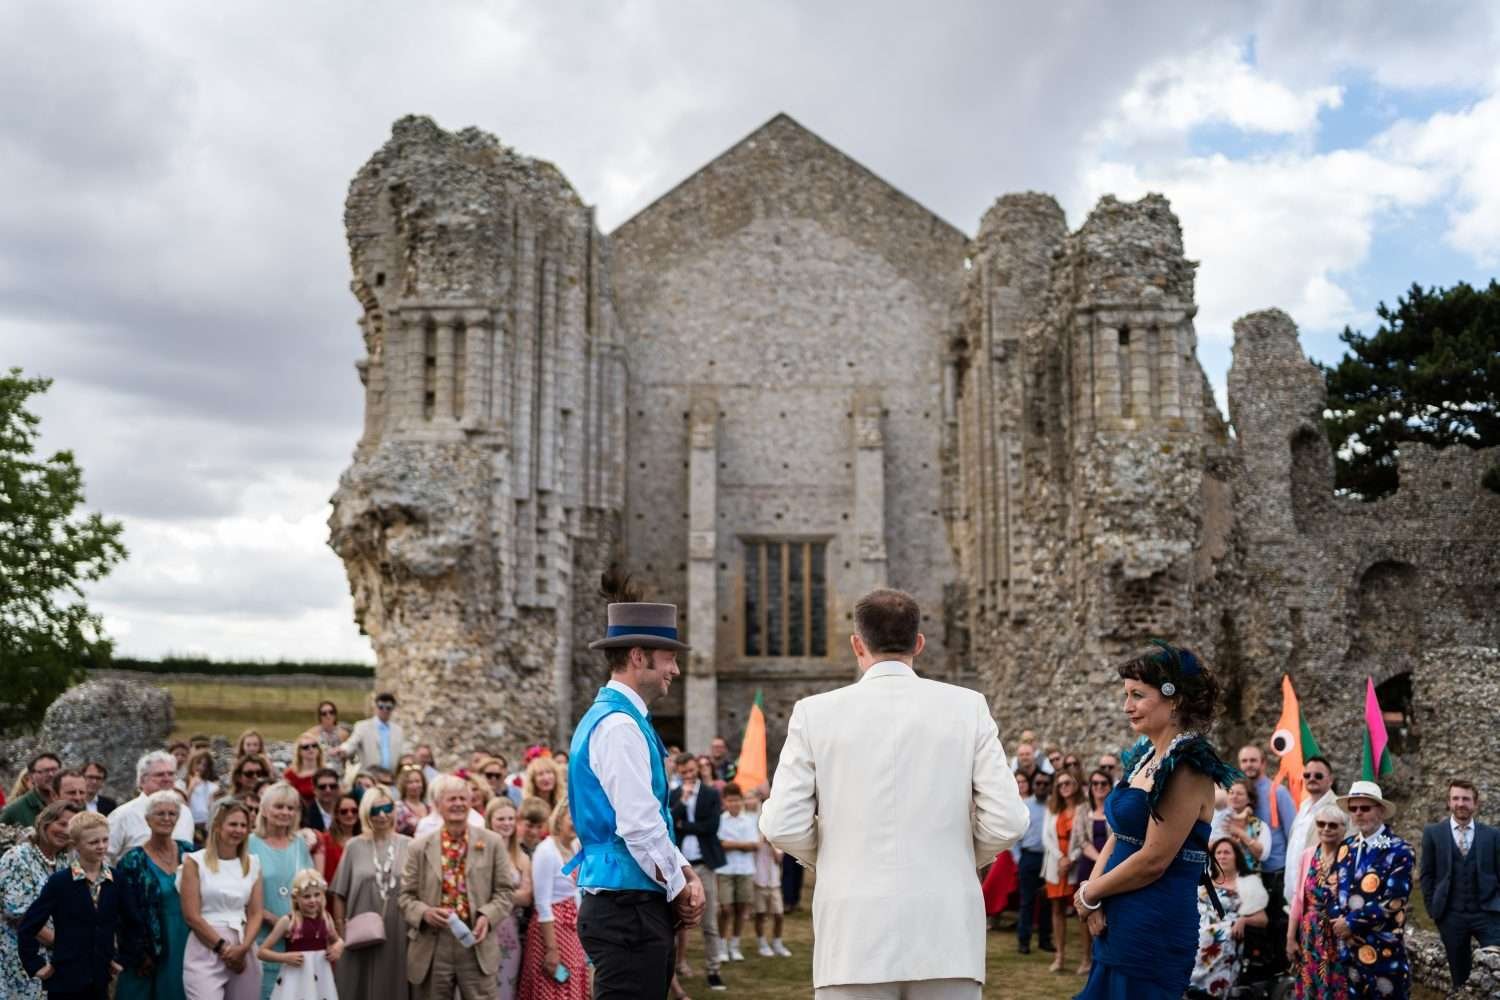 A couple celebrate their marriage at Binham Priory in Norfolk. The celecrant has his back to us as he reads to the family and friends of the family who we see in soft focus behind the couple and with the priory building and ruins set out as the background. 